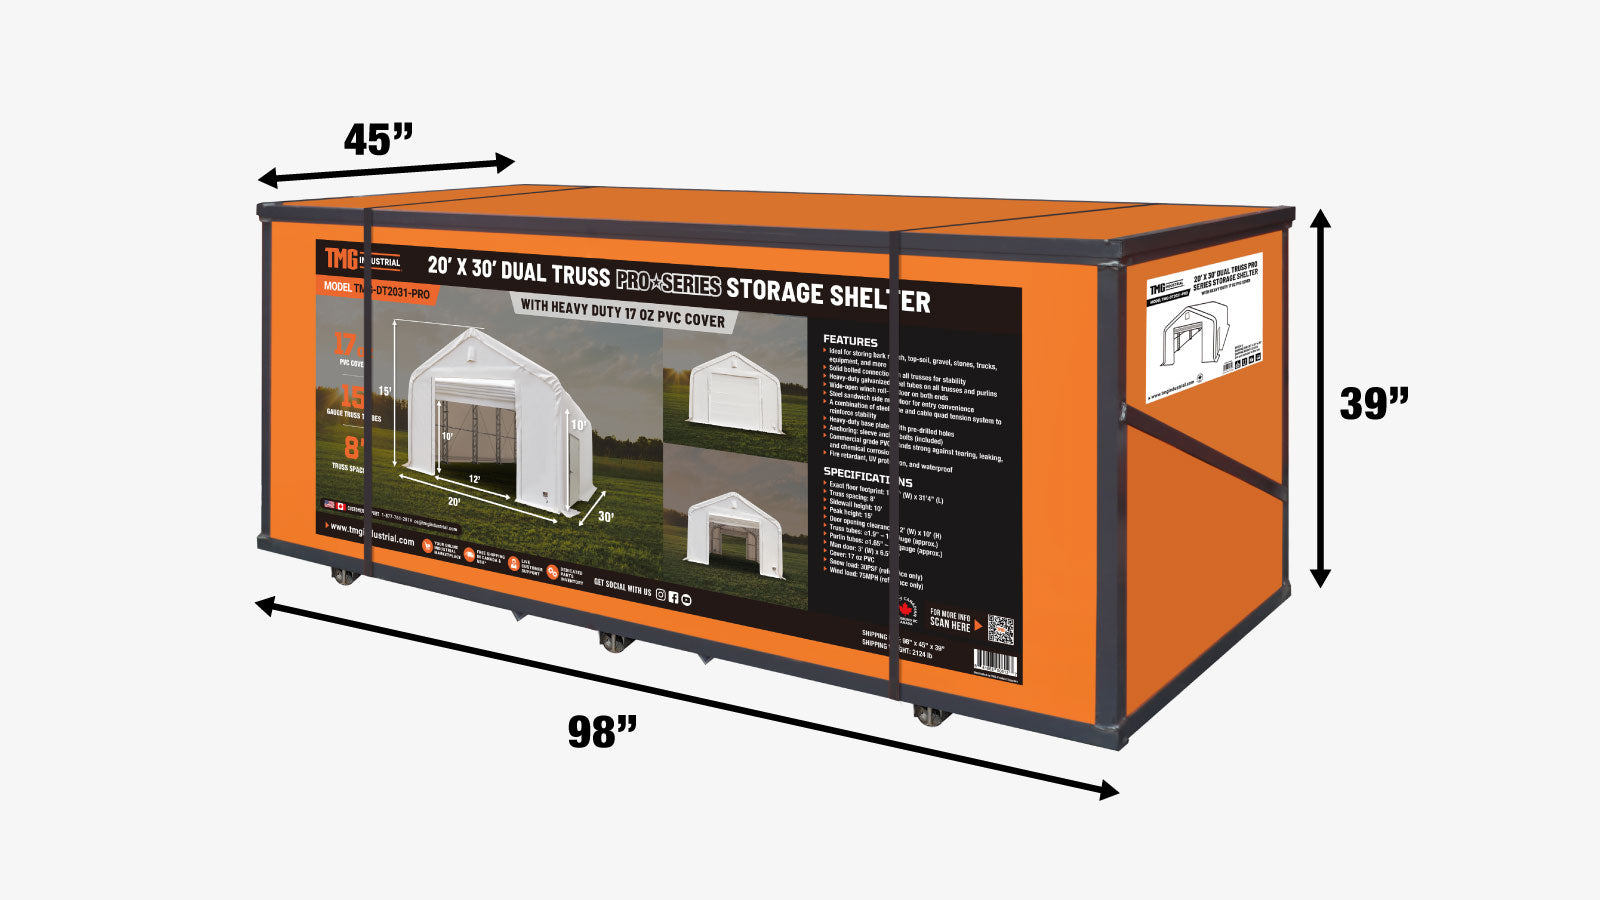 TMG Industrial Pro Series 20' x 30' Dual Truss Storage Shelter with Heavy Duty 17oz PVC Cover, TMG-DT2031-PRO (Previously DT2030-PRO)-shipping-info-image